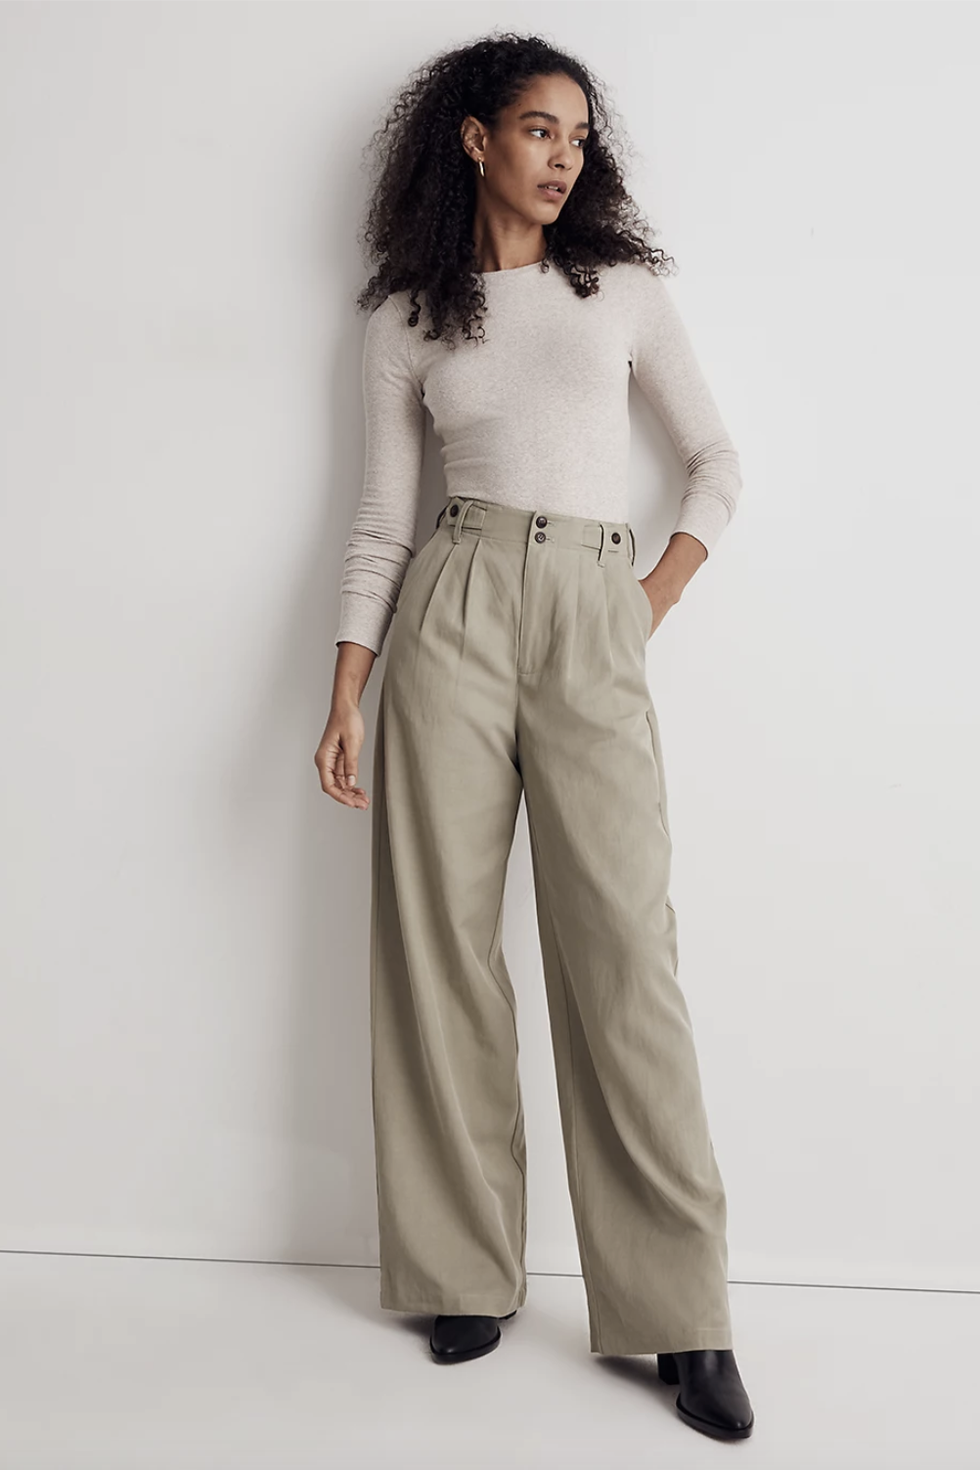 Pantalones Palazzo  Palazzo pants outfit, Pants outfit, Work outfit